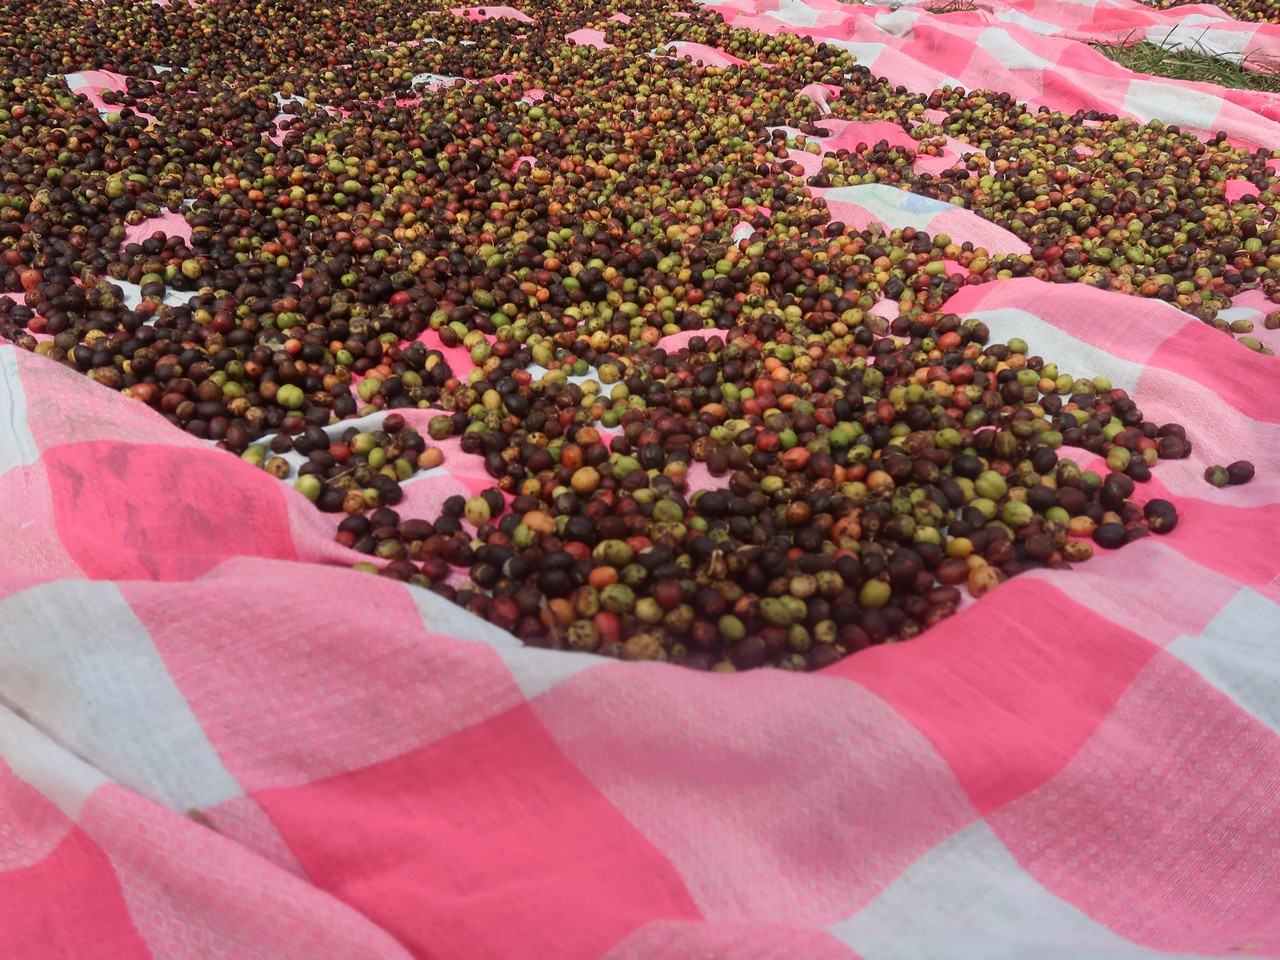 Drying coffee beans.